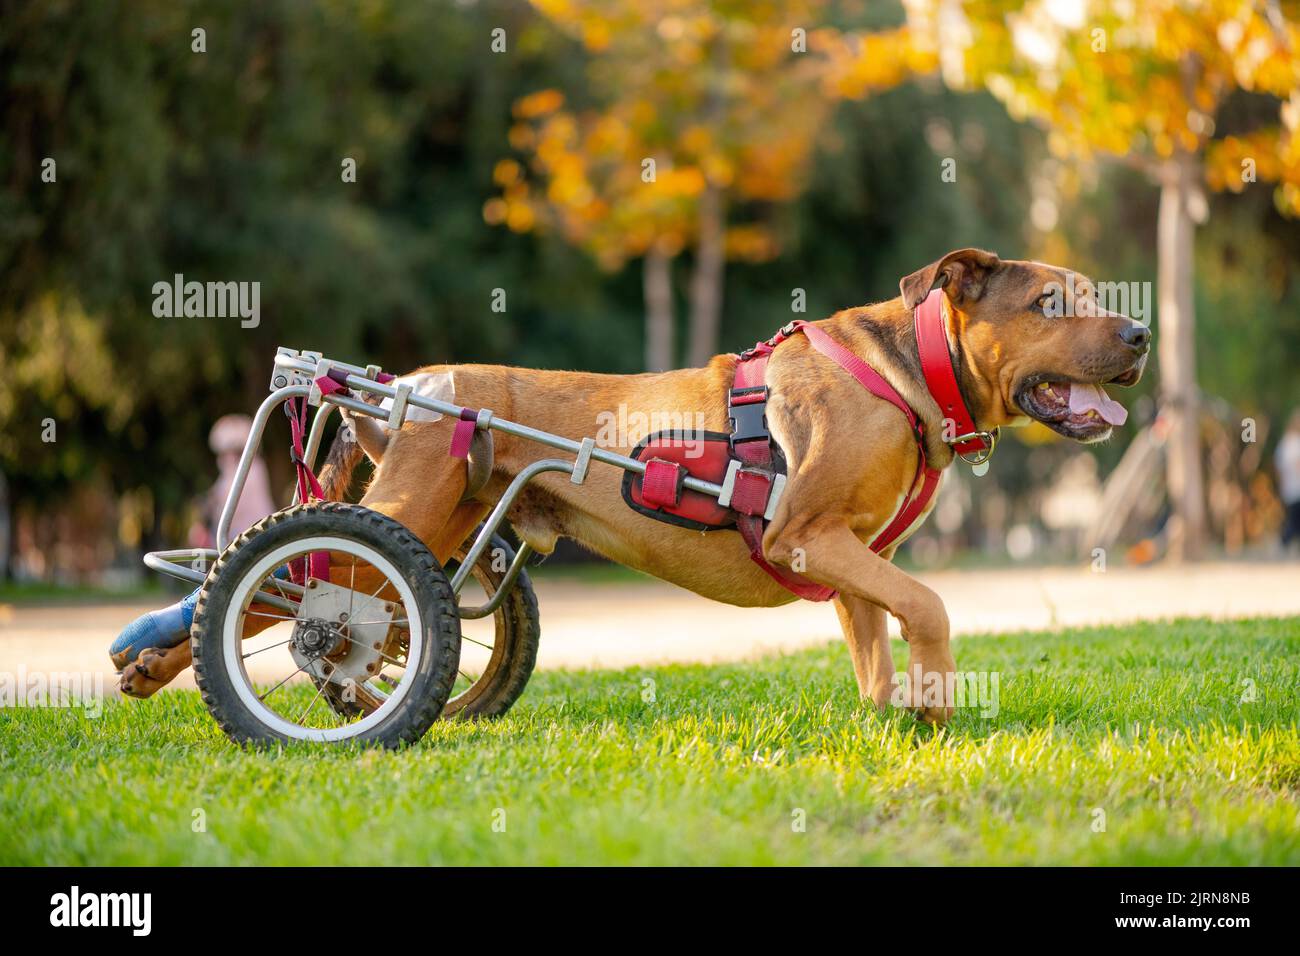 Handicapped dog in wheelchair at a park Stock Photo